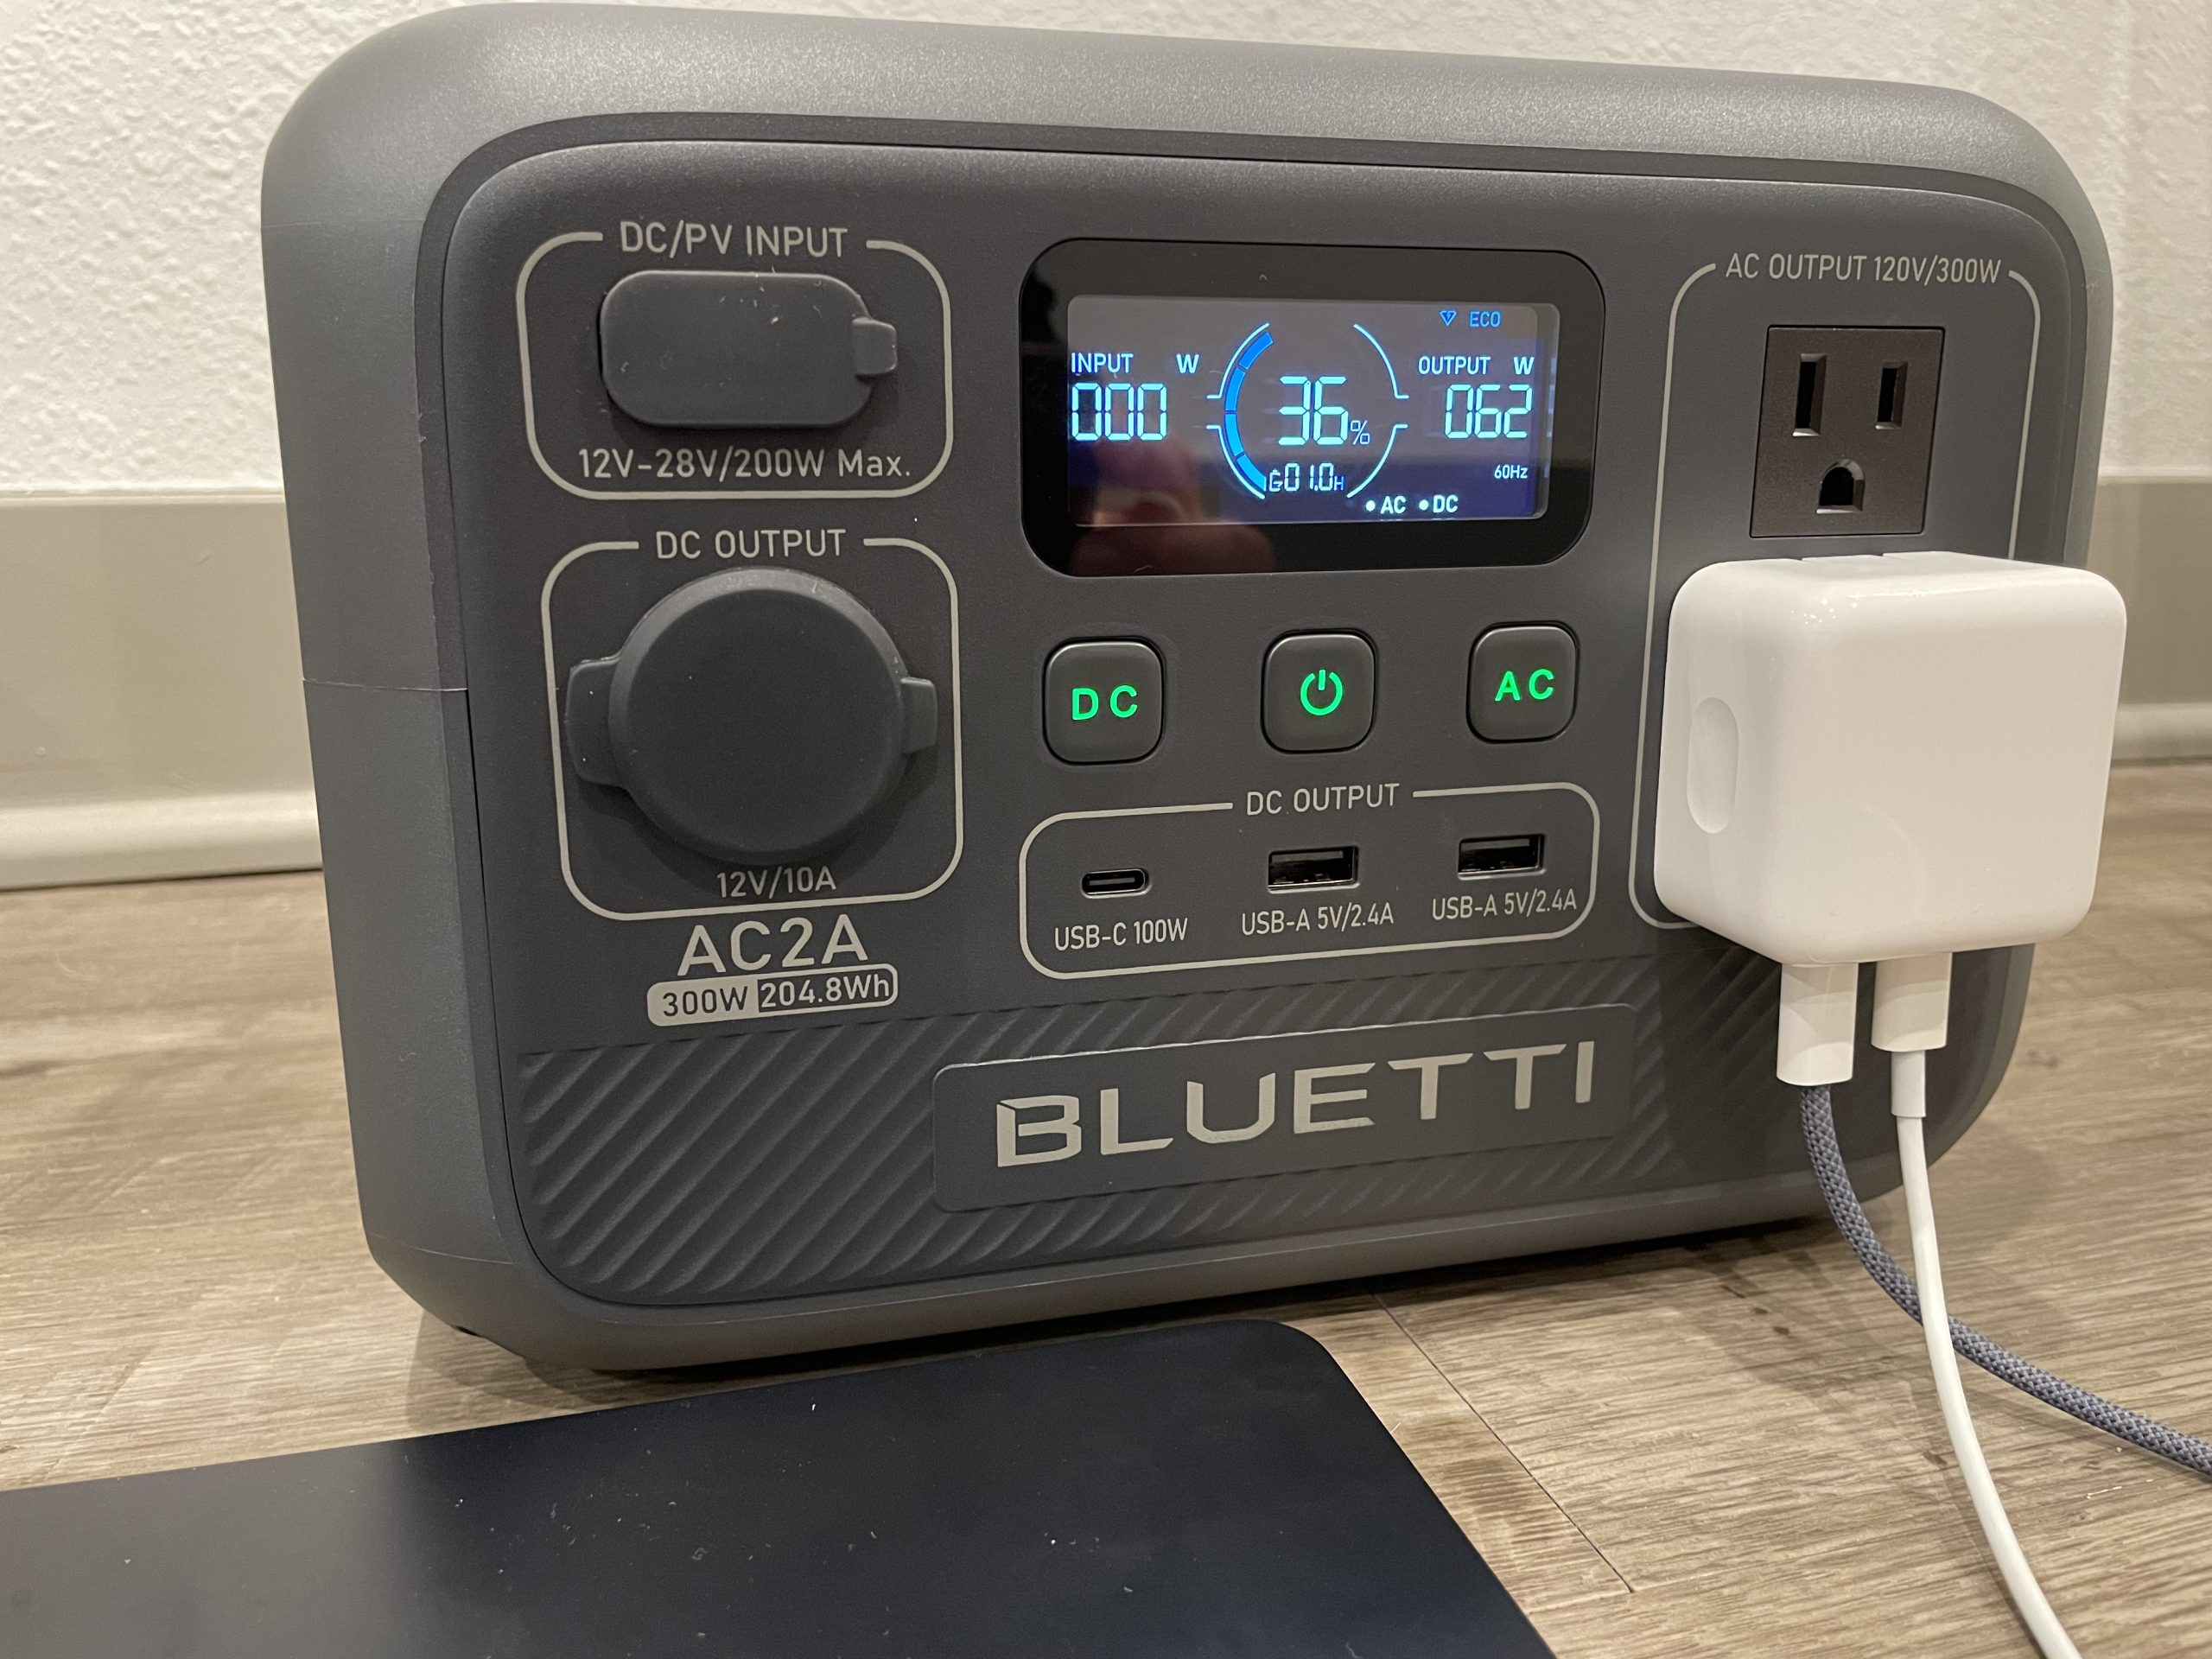 Bluetti AC2A Portable Power Station: Hands-On Review